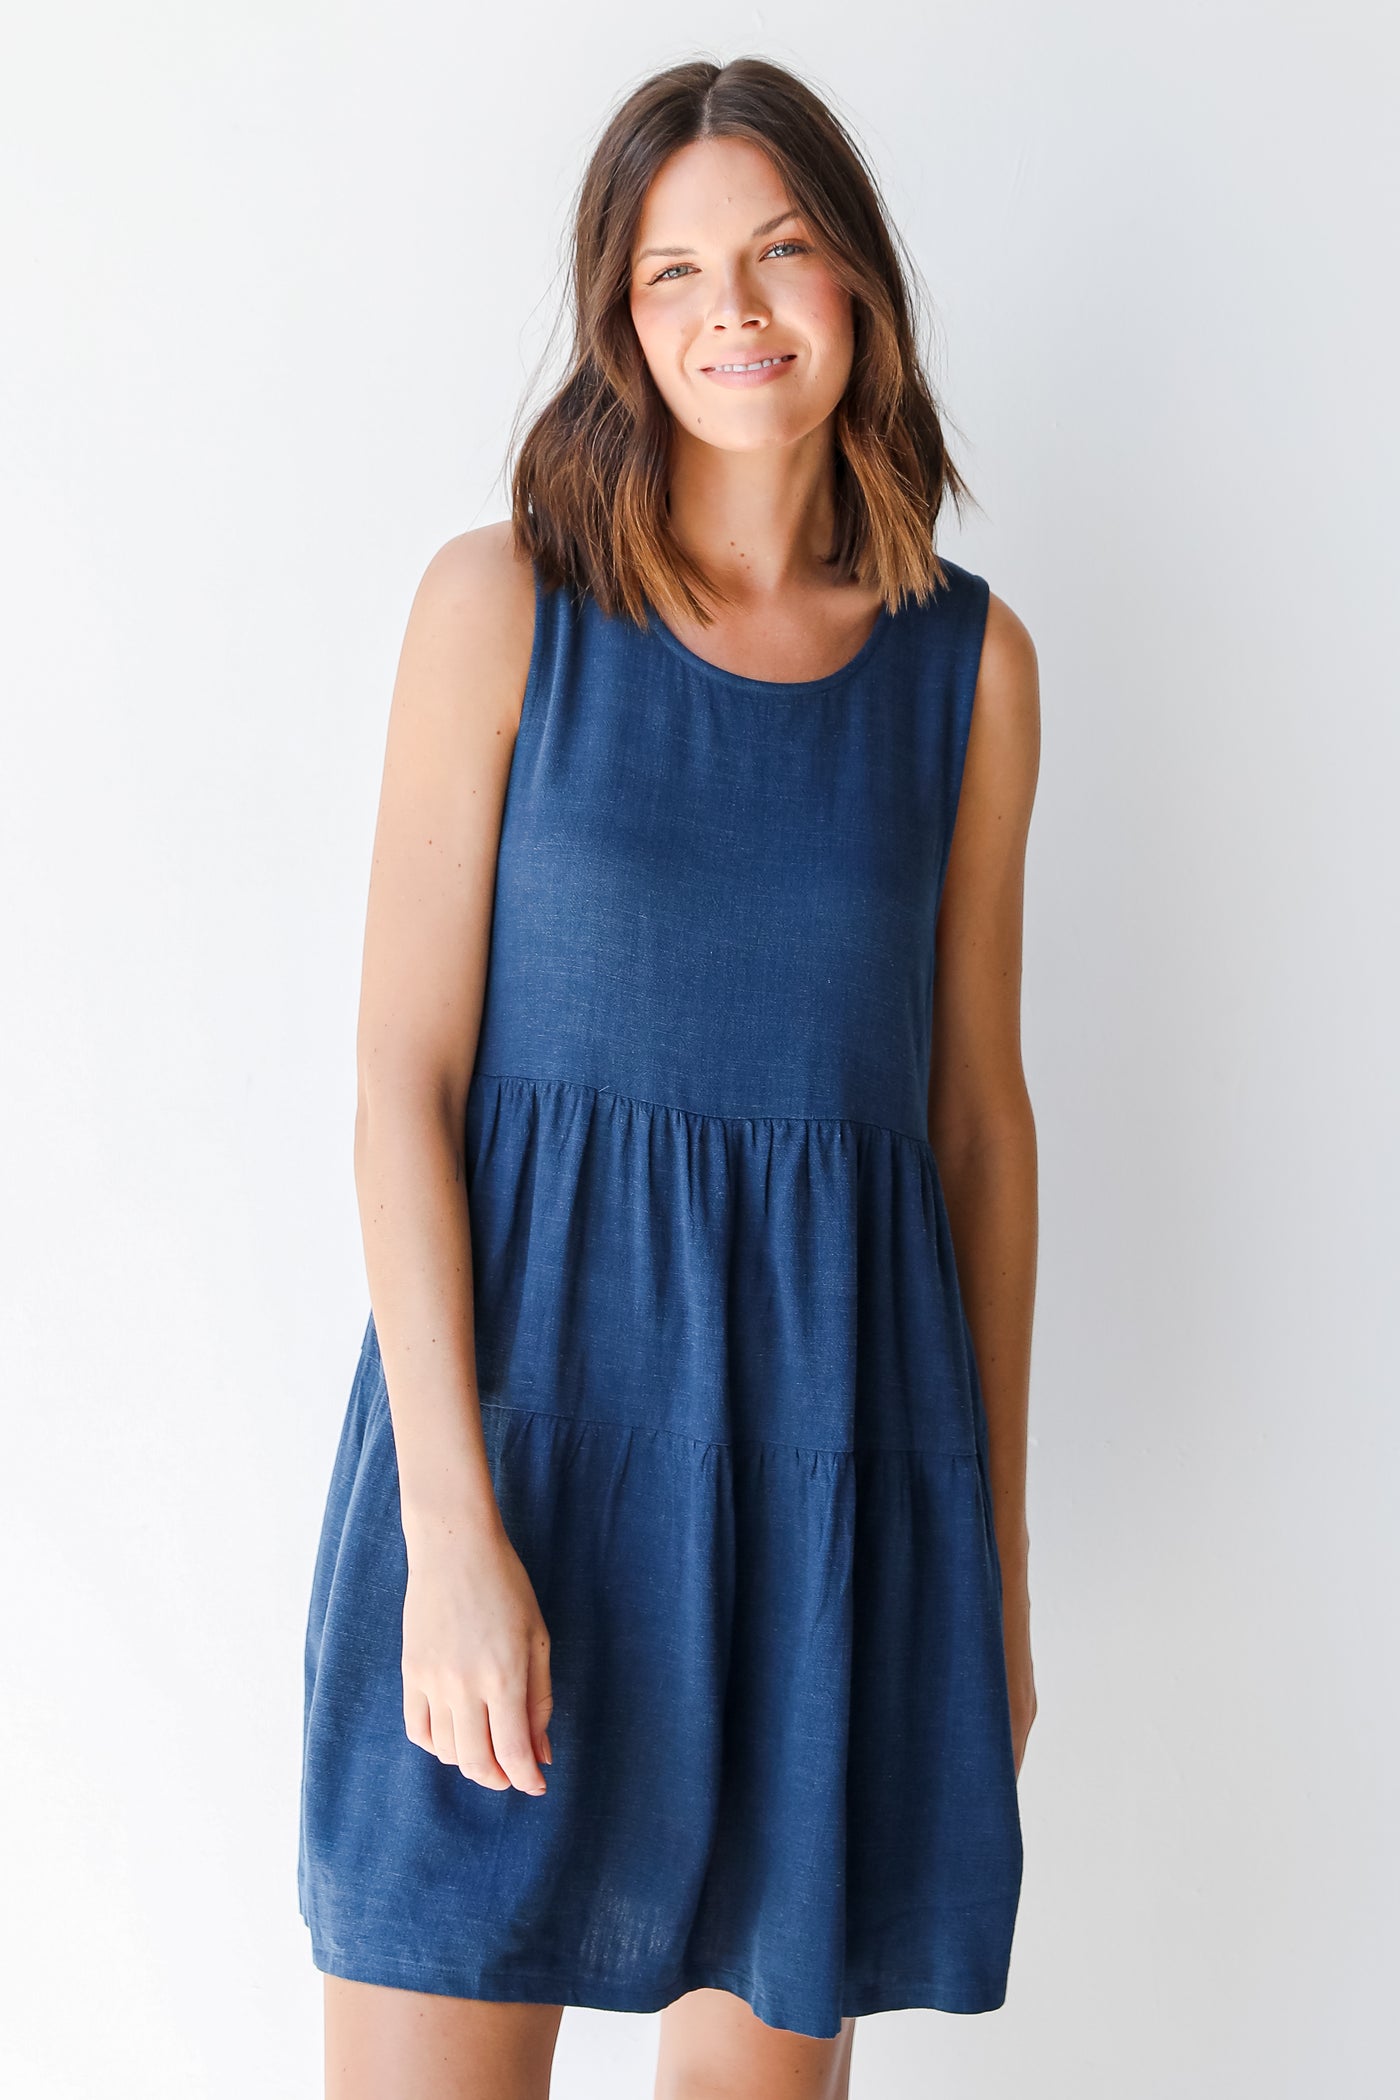 Linen Tiered Mini Dress in navy front view